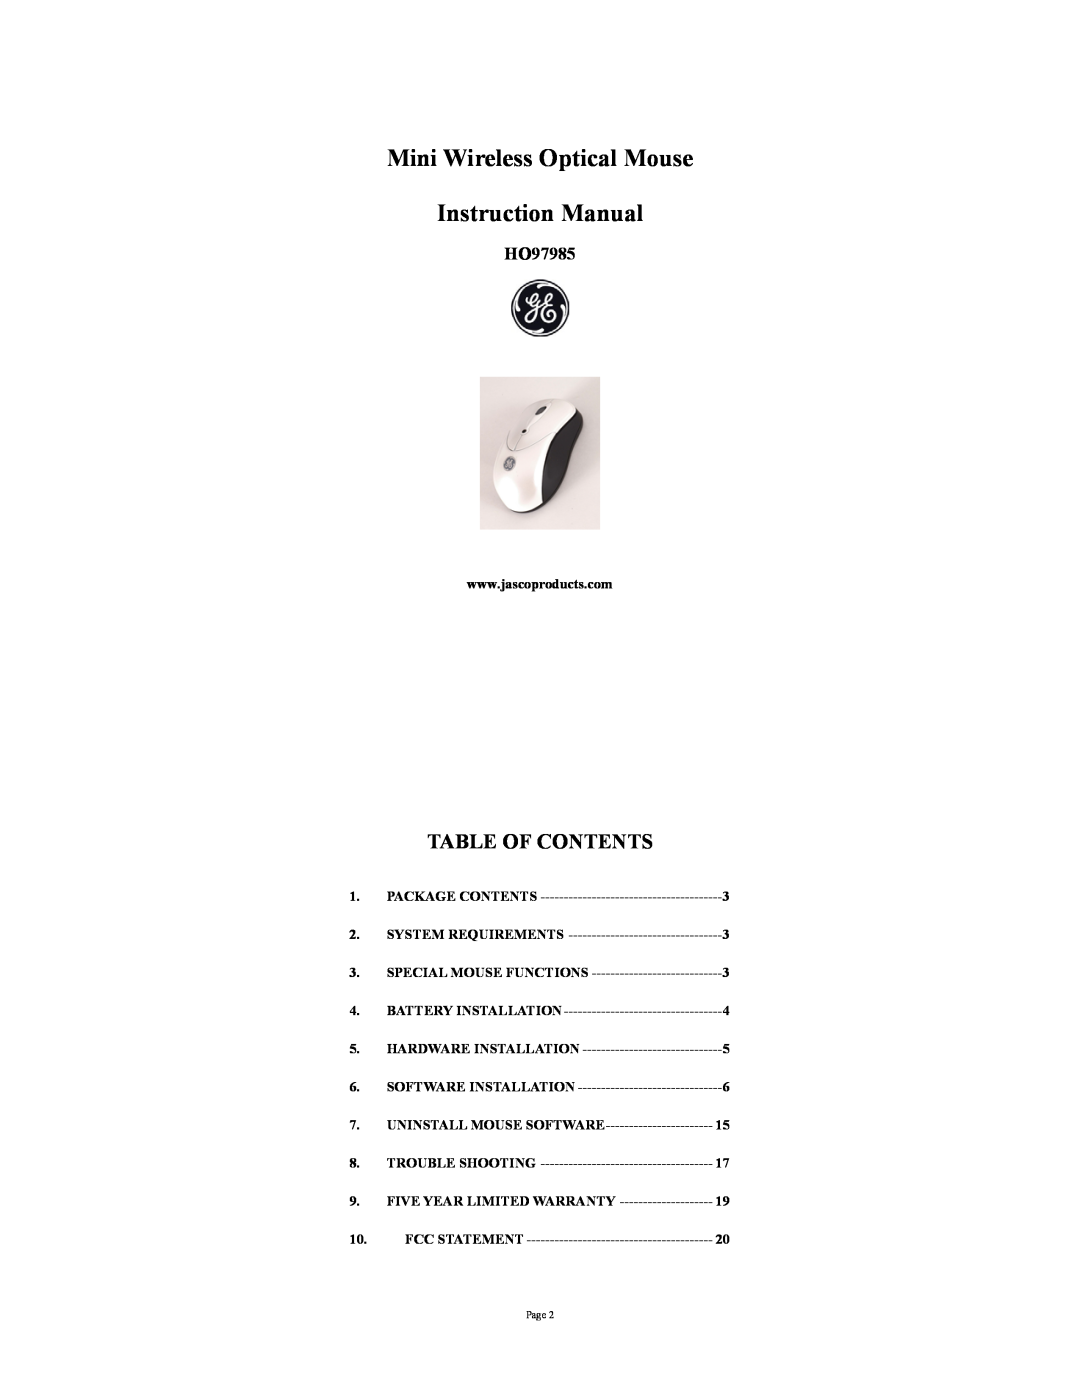 GE HO97985 instruction manual Mini Wireless Optical Mouse Instruction Manual, Table Of Contents 